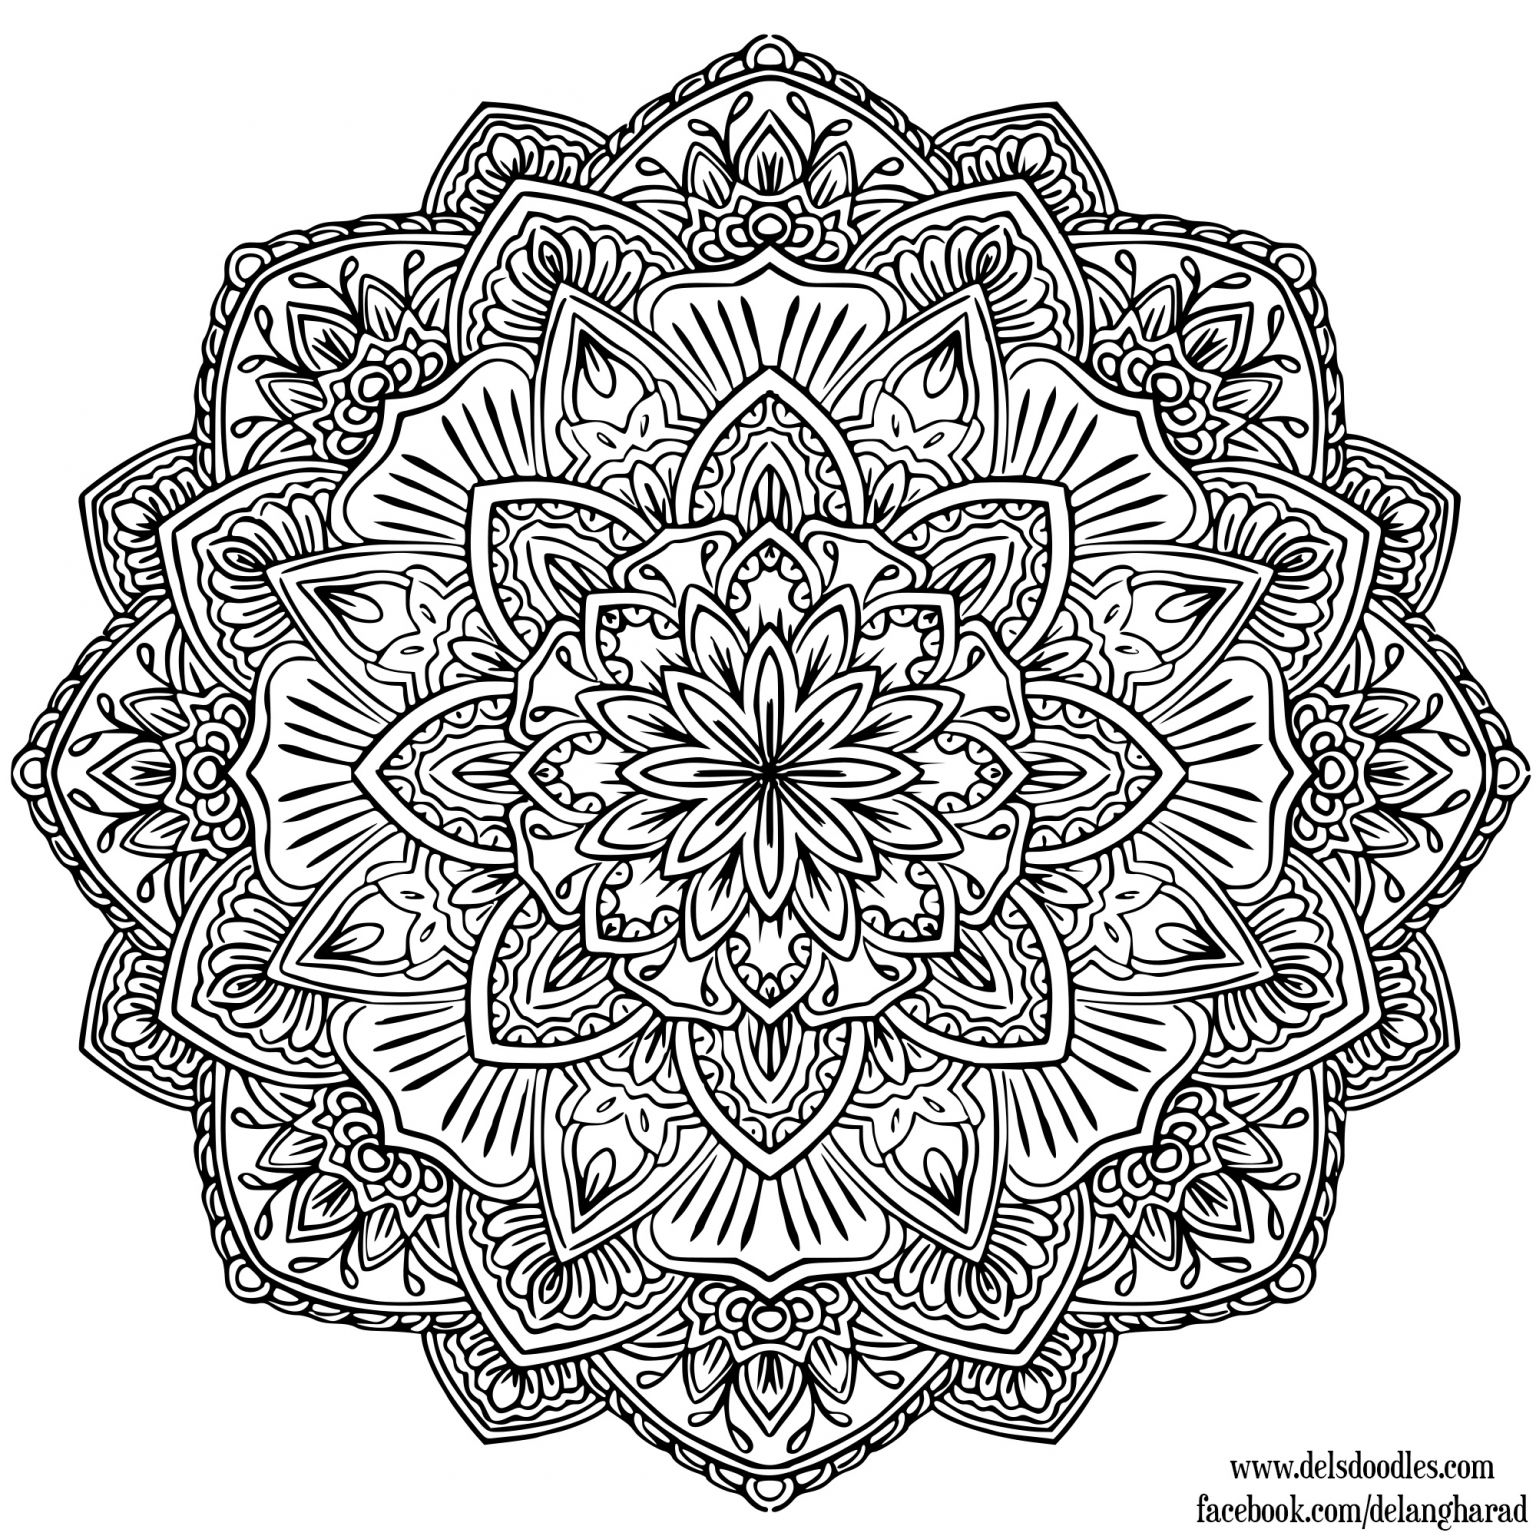 Coloriage Mandala Difficile Unique the Meaning and Symbolism Of the Word Mandala